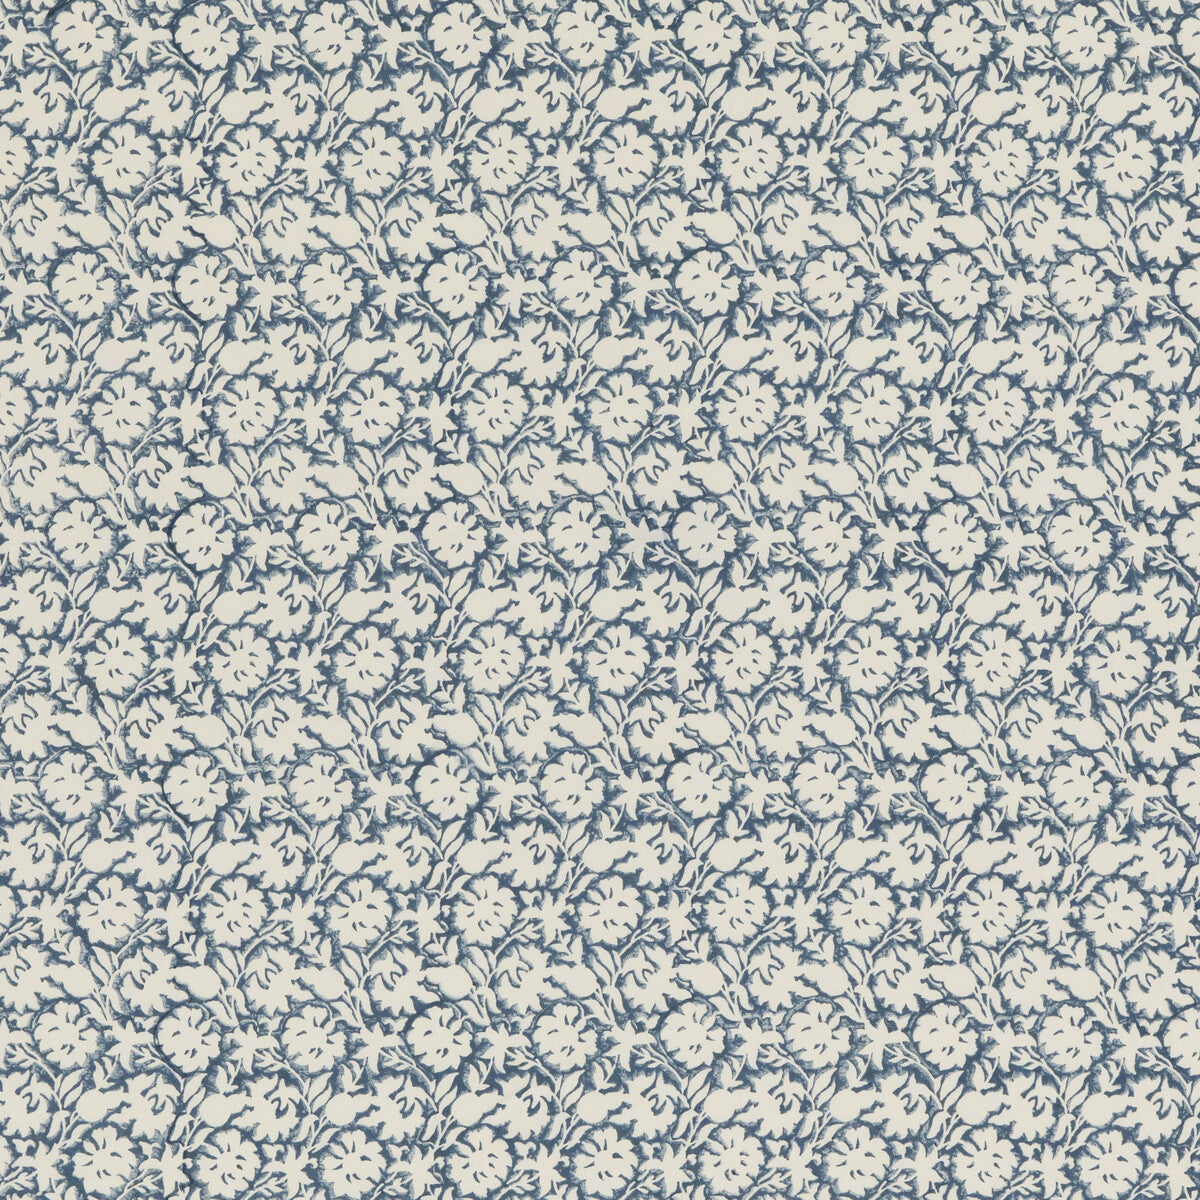 Flower Press fabric in indigo color - pattern PP50480.1.0 - by Baker Lifestyle in the Block Party collection